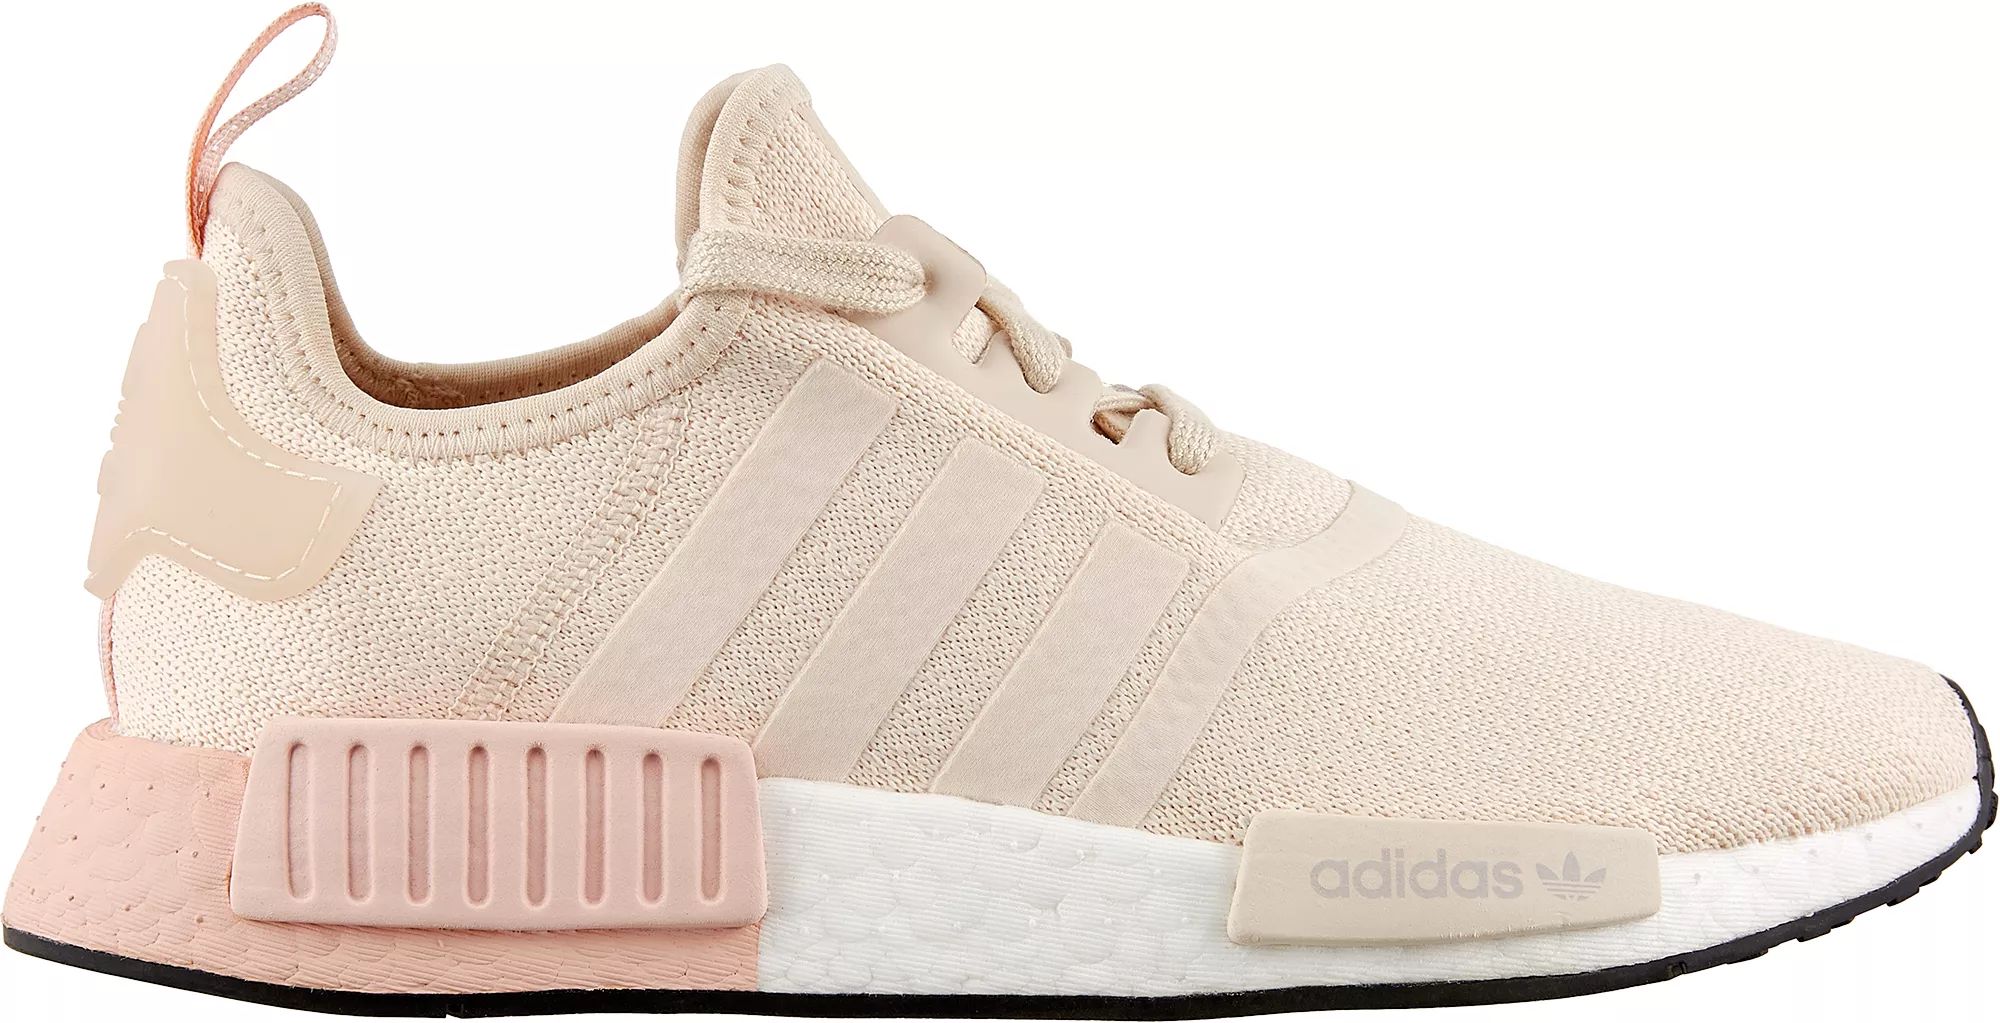 adidas Originals Women's NMD_R1 shoes, Size: 6.0, Cream/Pink | Dick's Sporting Goods